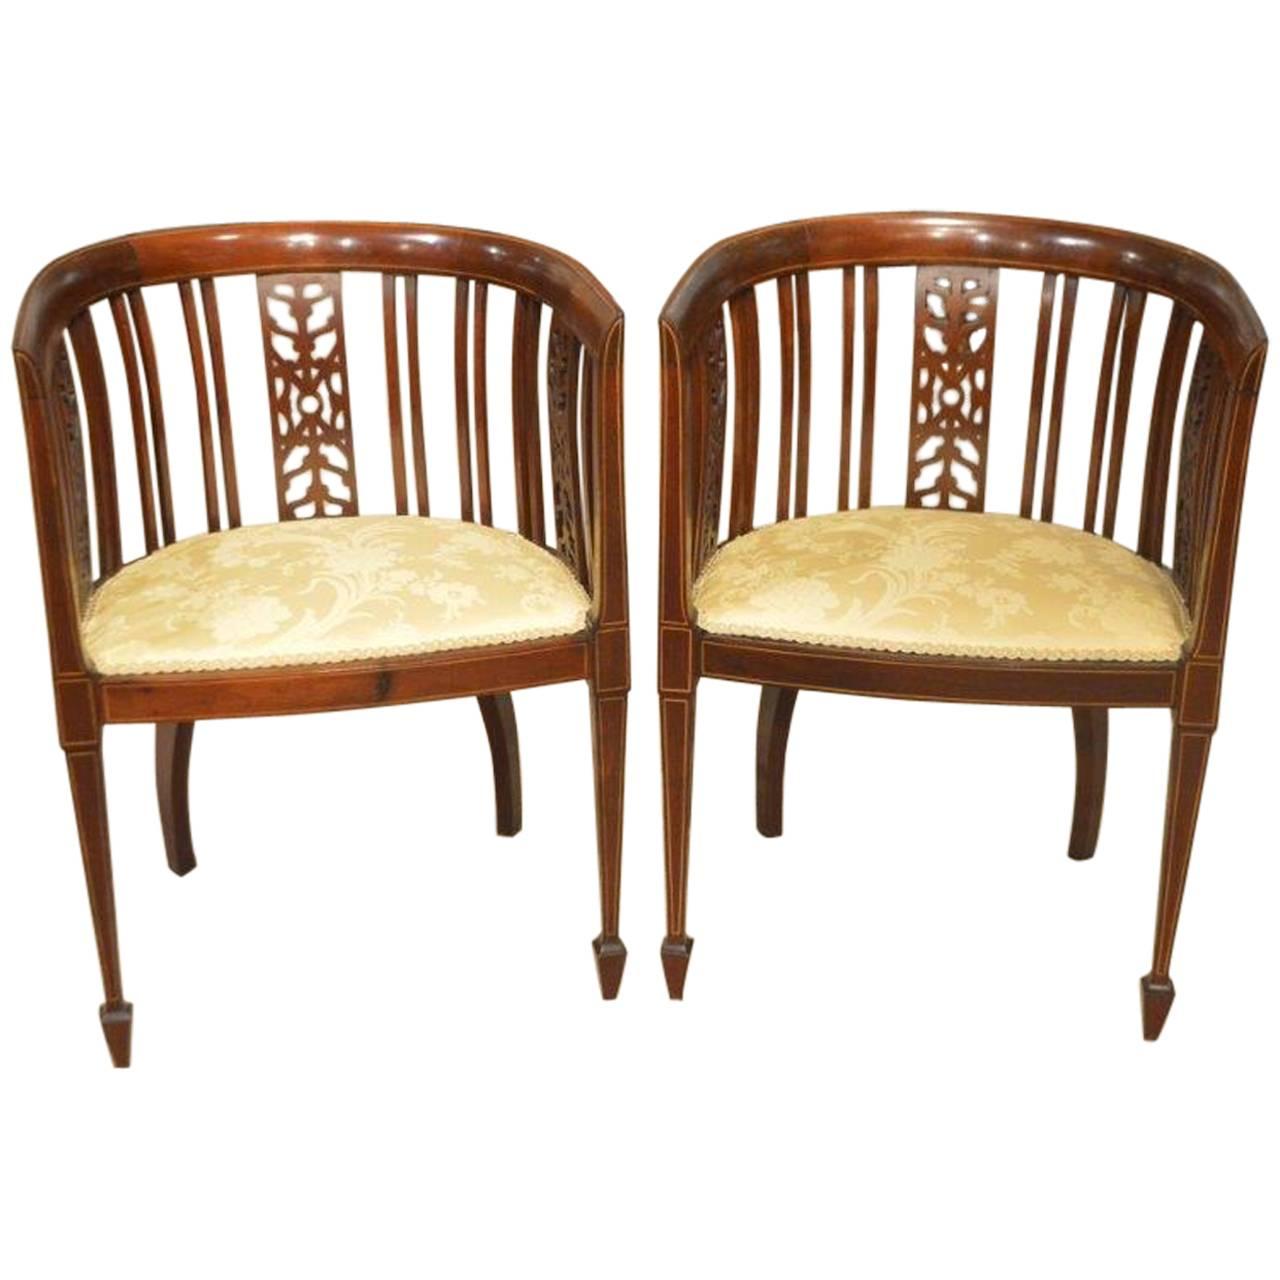 Pair of Mahogany Inlaid Edwardian Period Antique Bedroom Chairs